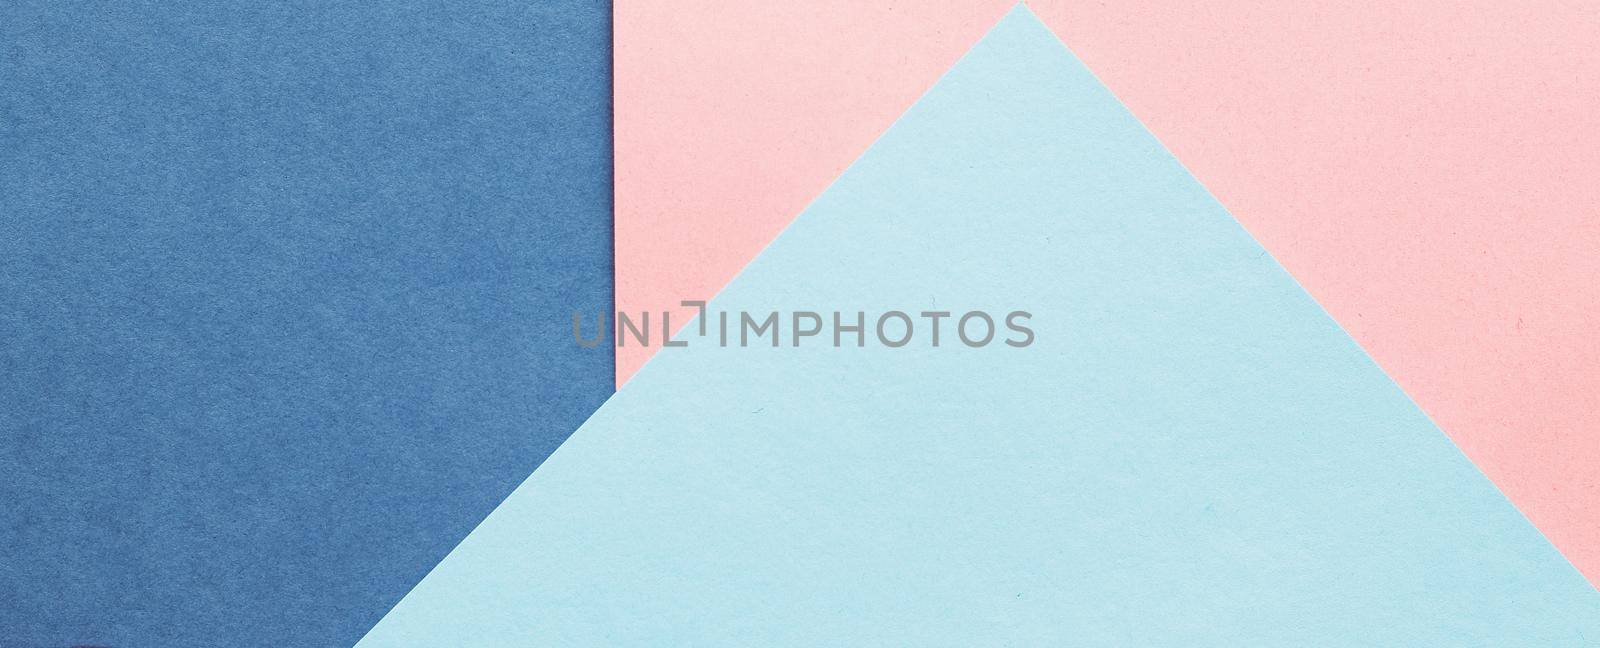 Abstract blank paper texture background, stationery mockup flatlay backdrop, brand identity design mock up for holiday branding template and notepaper layout by Anneleven